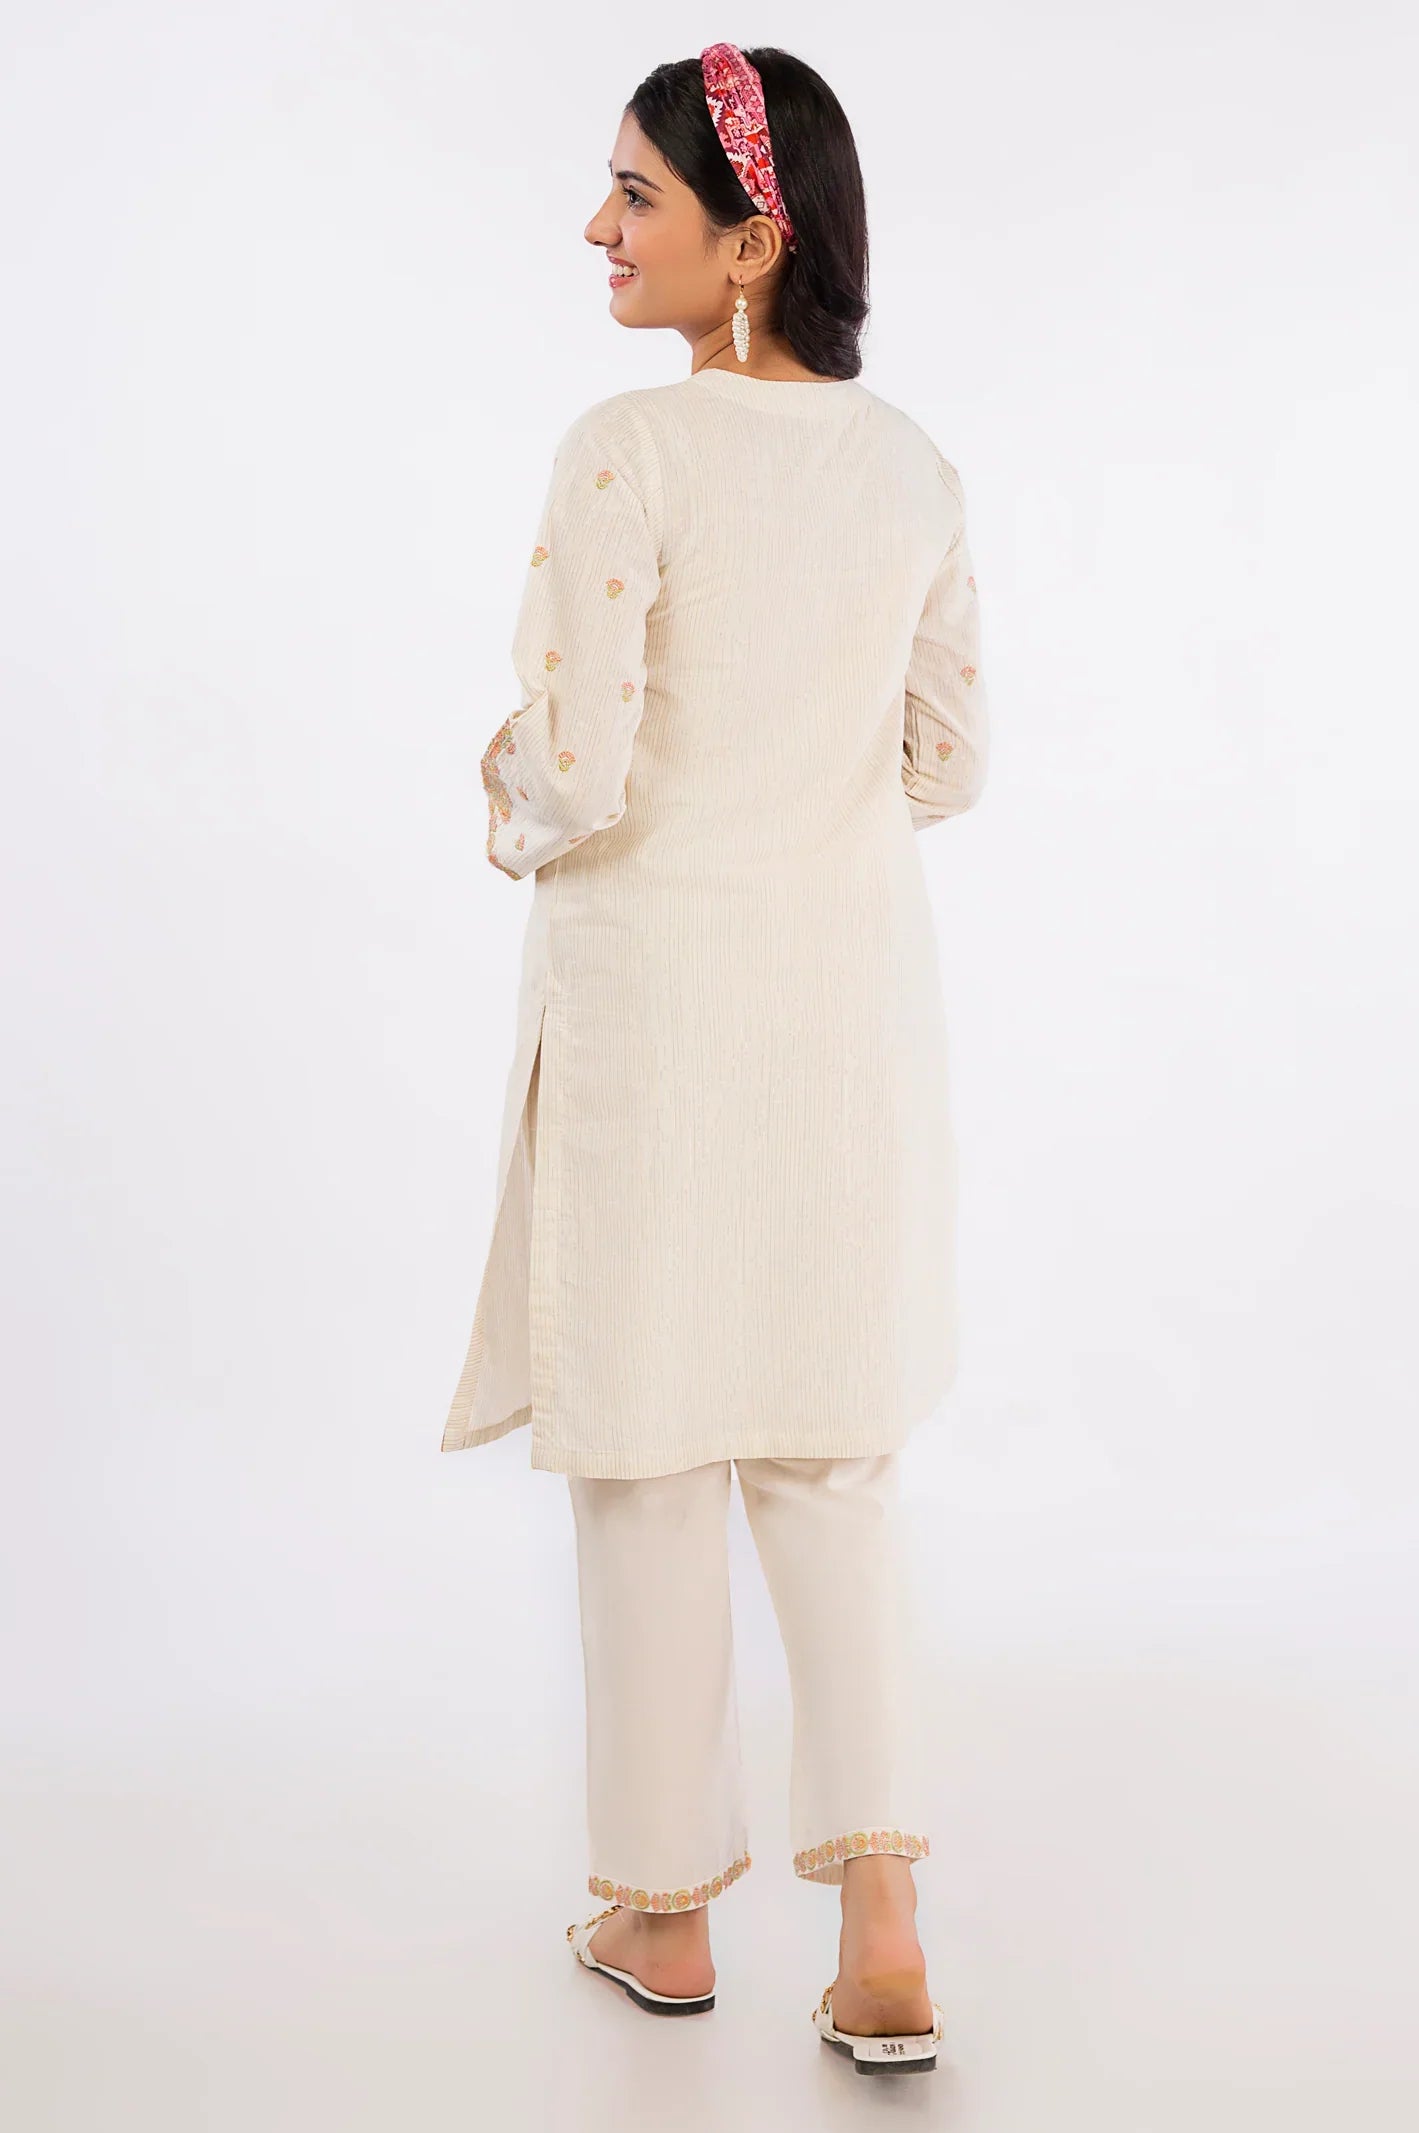 2PC Ivory Embroidered Teens Suit - Diners